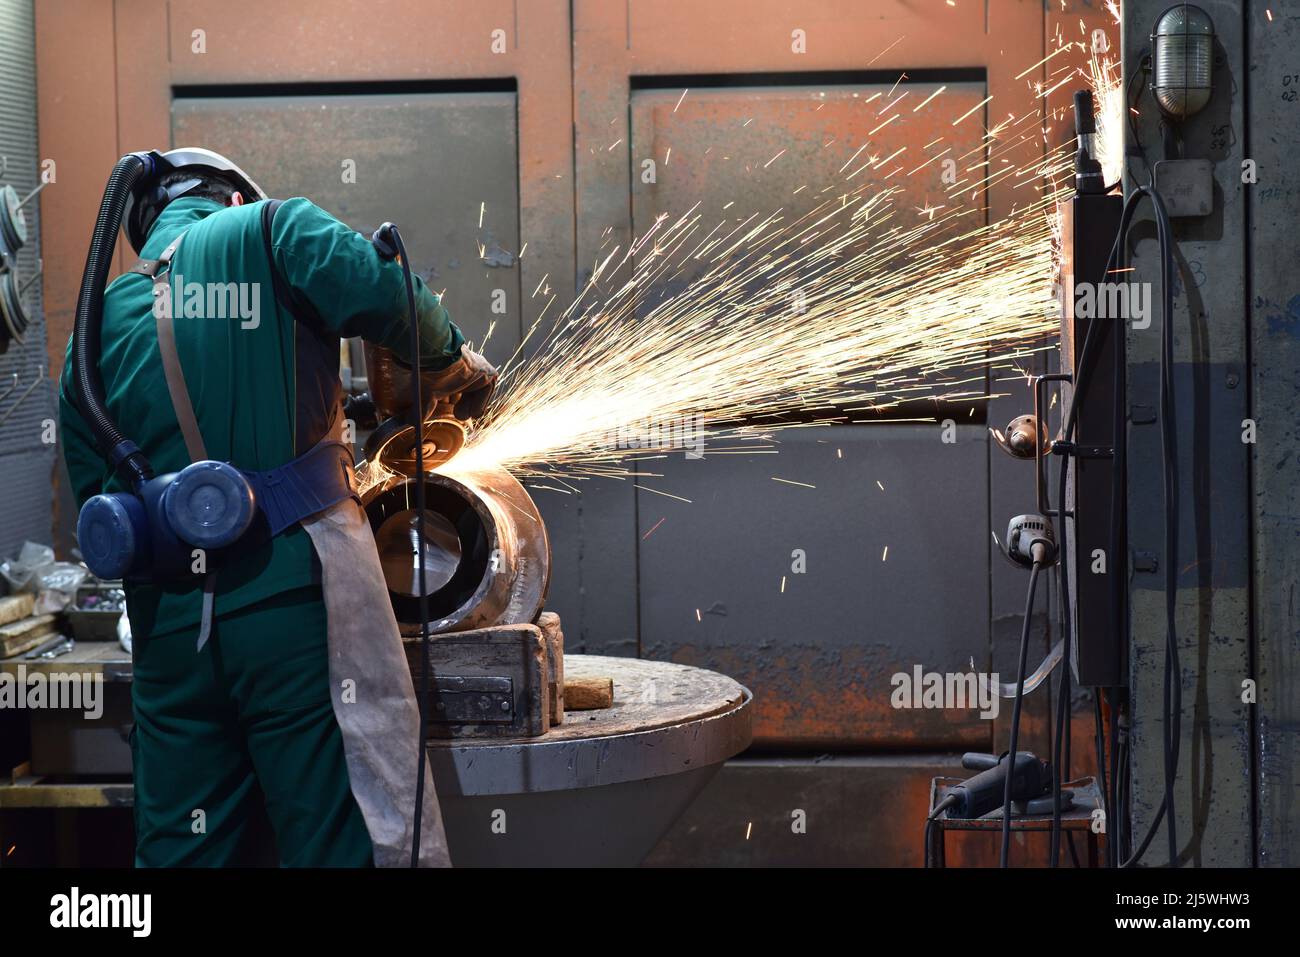 workers in safety clothing sanding a casting in an industrial company Stock Photo